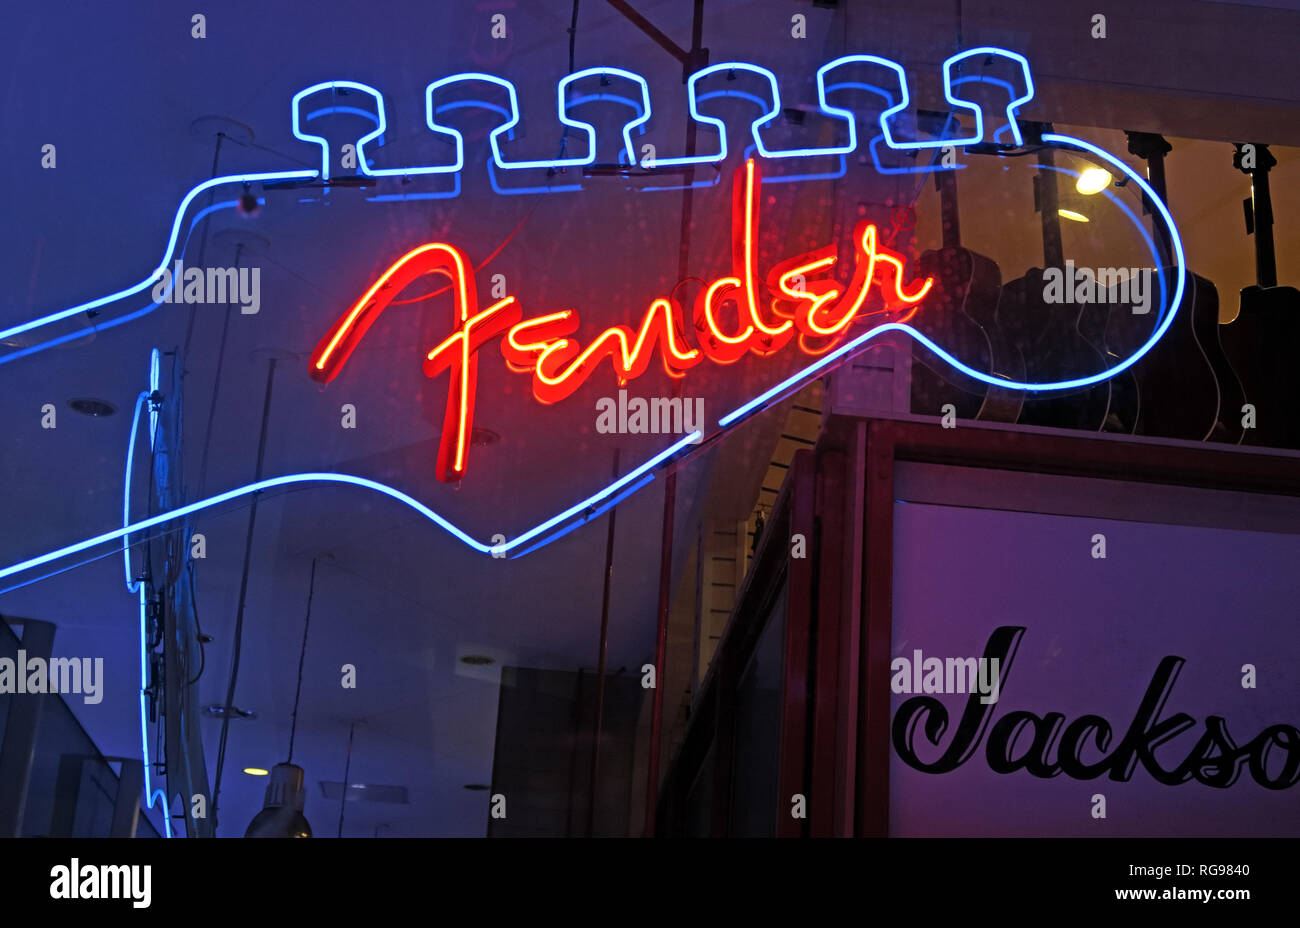 Fender Guitar Neon Sign in blue and red / orange, in a music shop Stock Photo